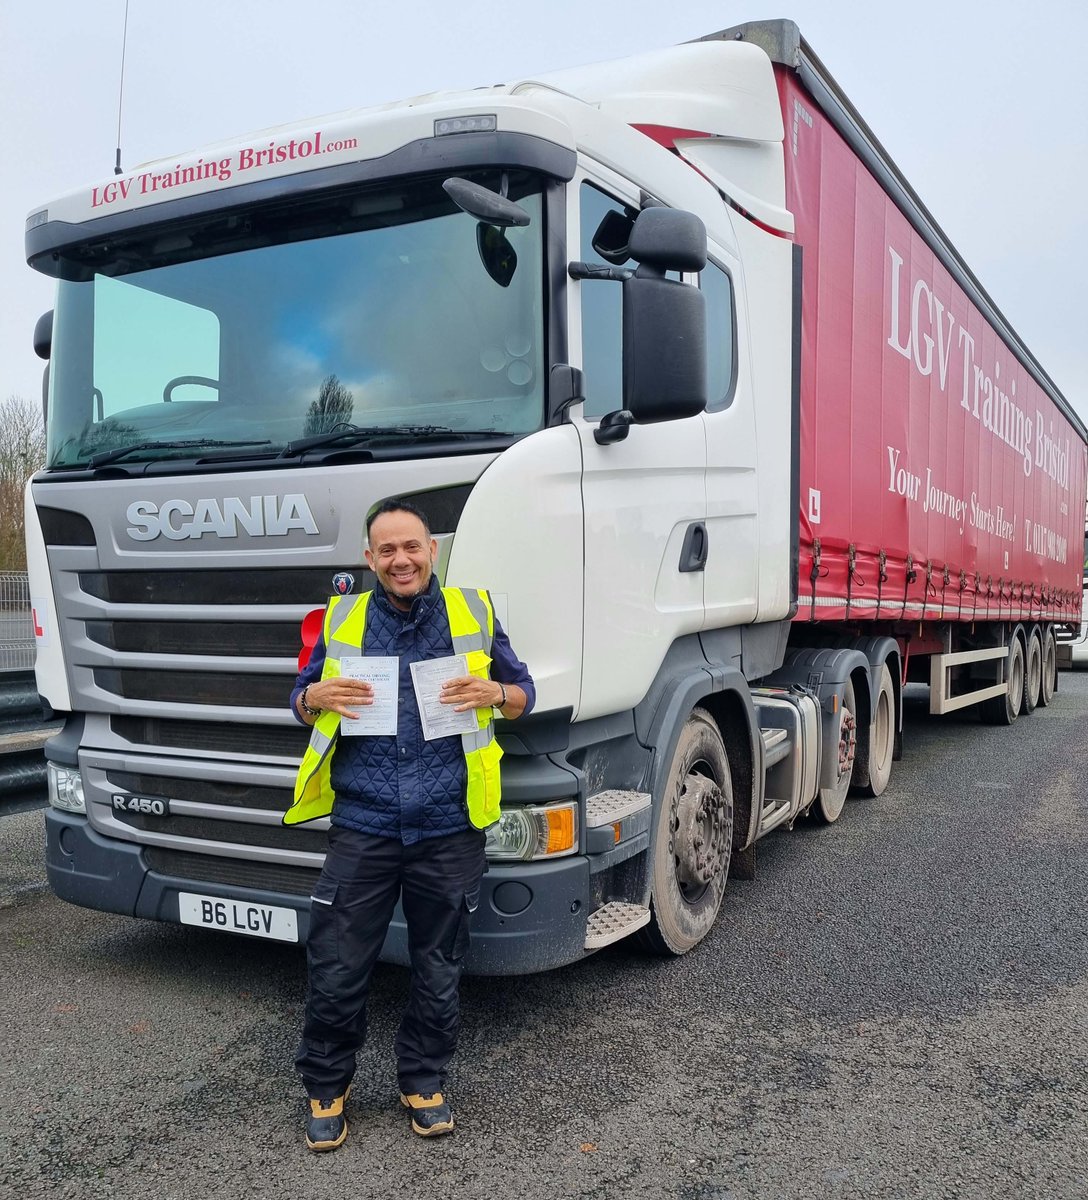 Another Fantastic Friday! Two more first time passes. Huge congratulations to Weldin on passing his LGV Cat.C+E driving test today. We wish you all the very best for the future Weldin. LGVTrainingBristol.com #YourJourneyStartsHere